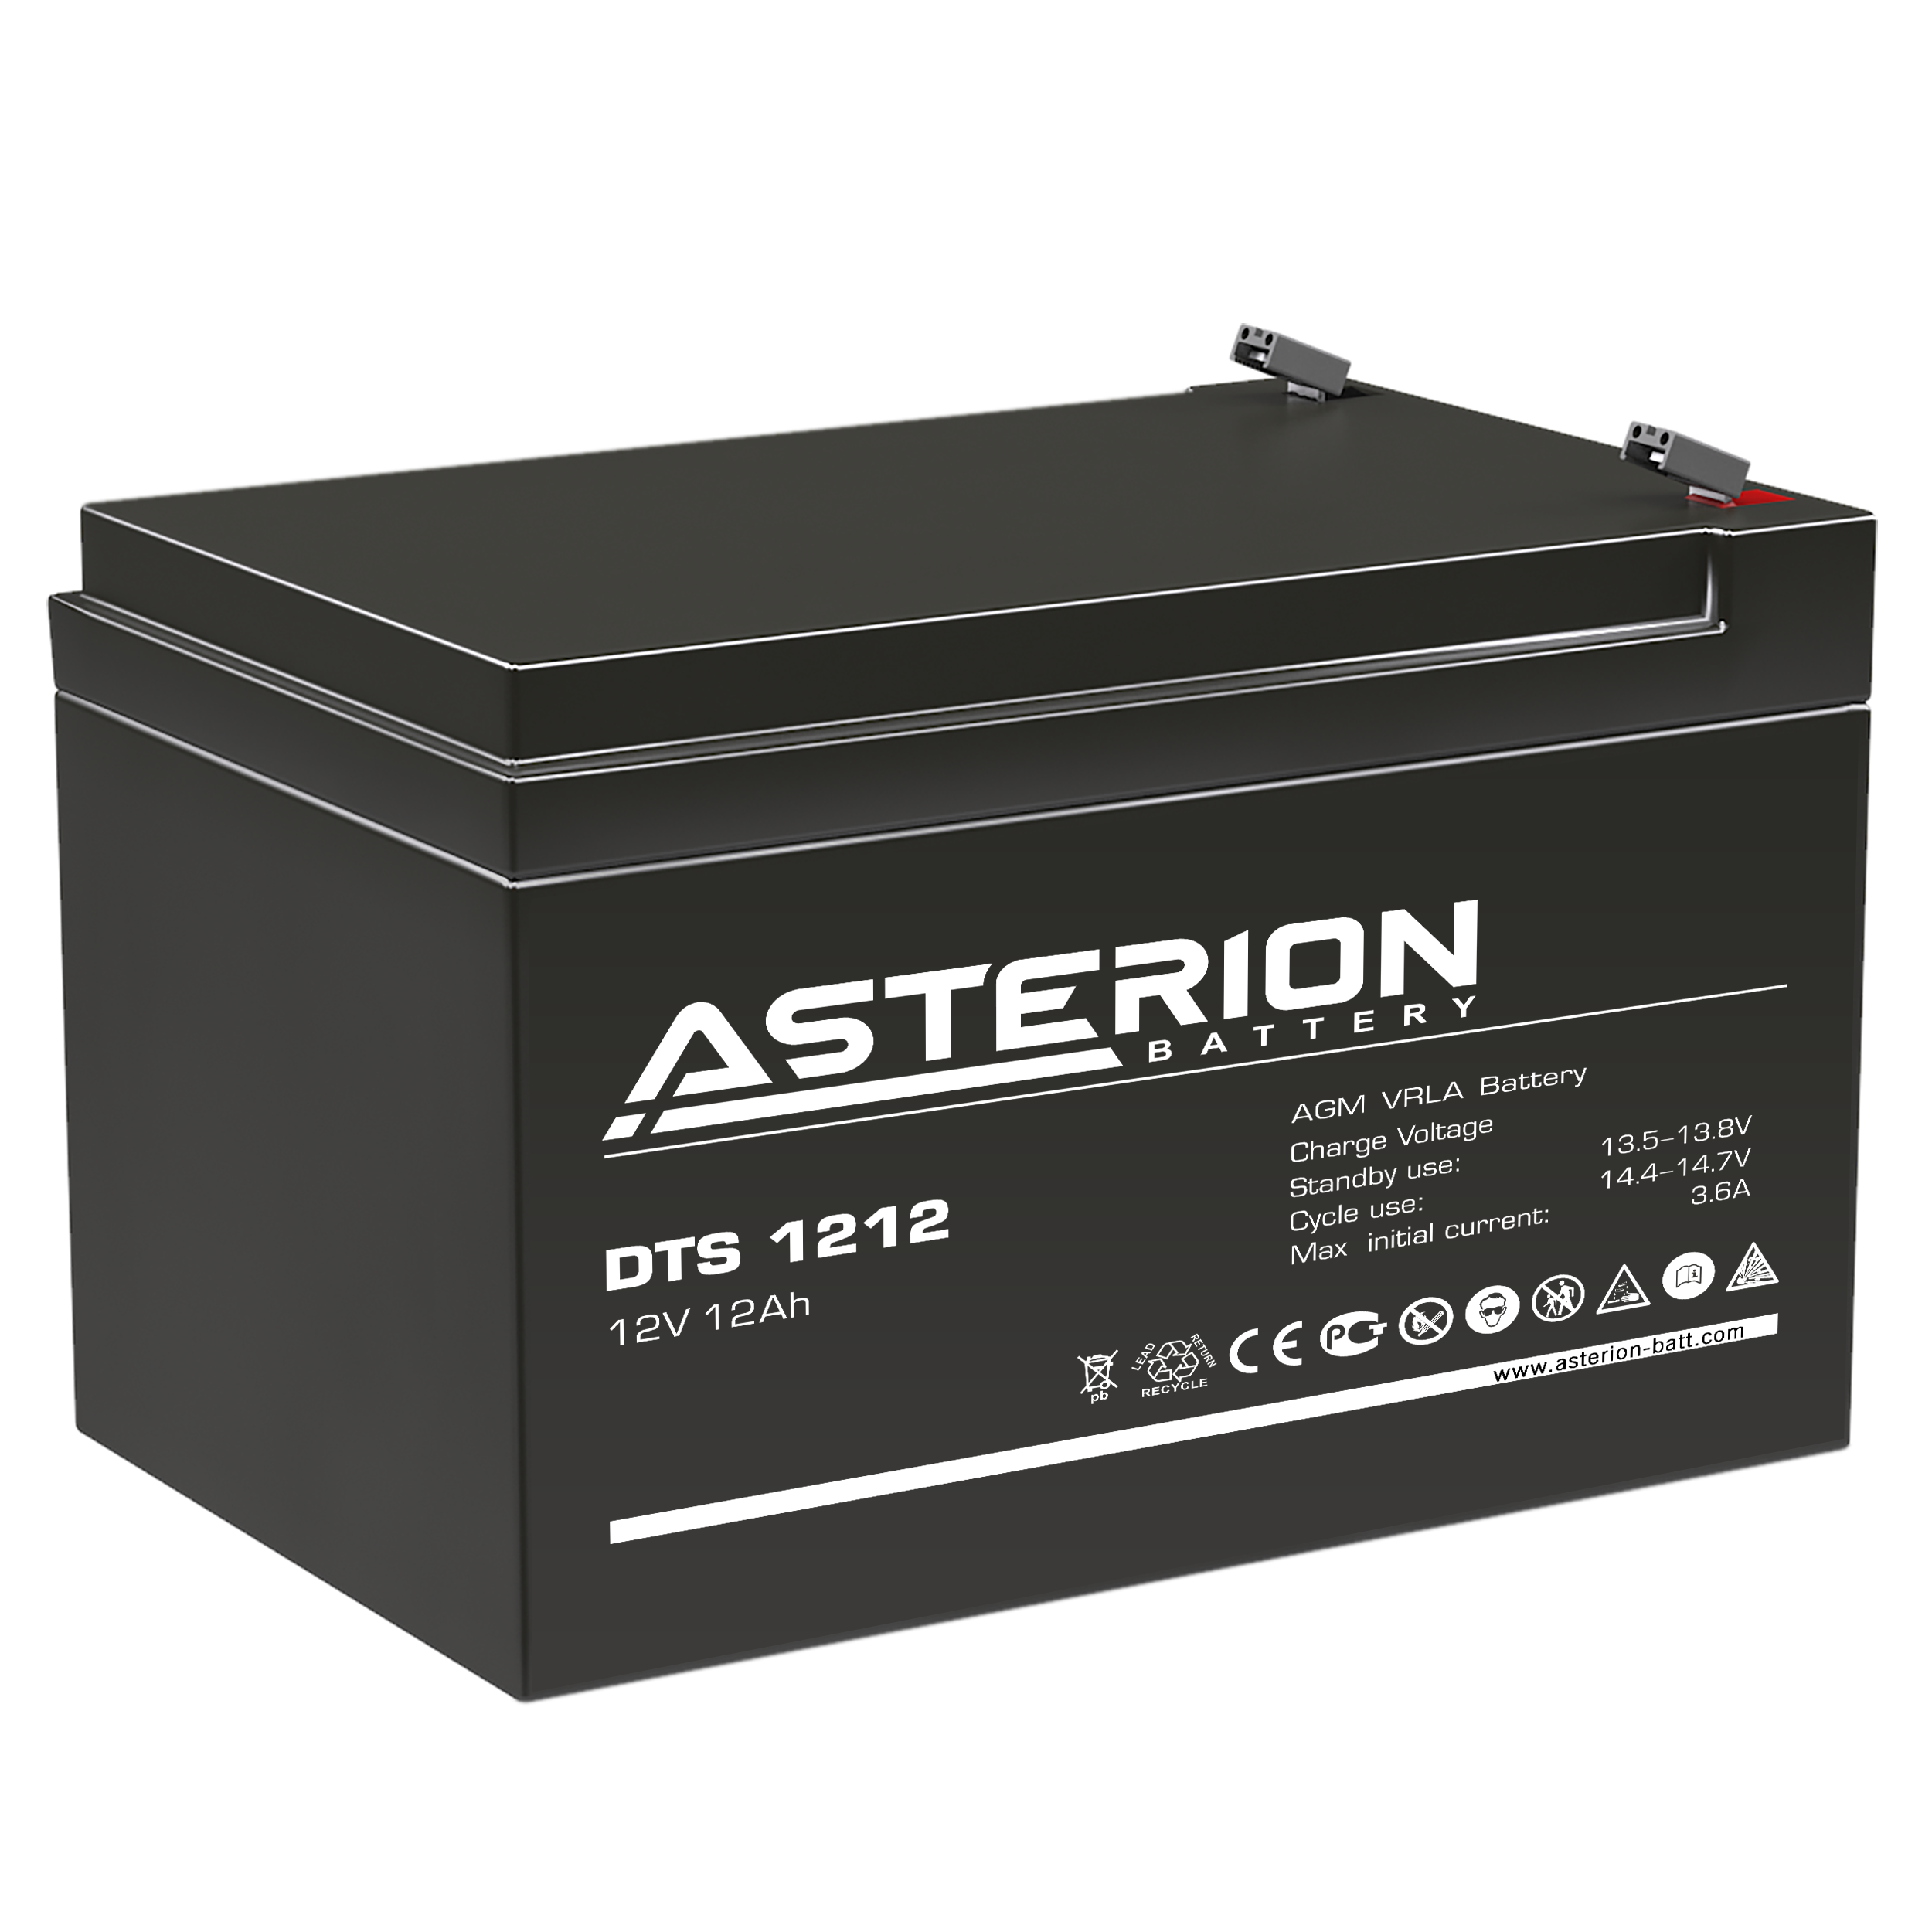 Asterion DTS 1212